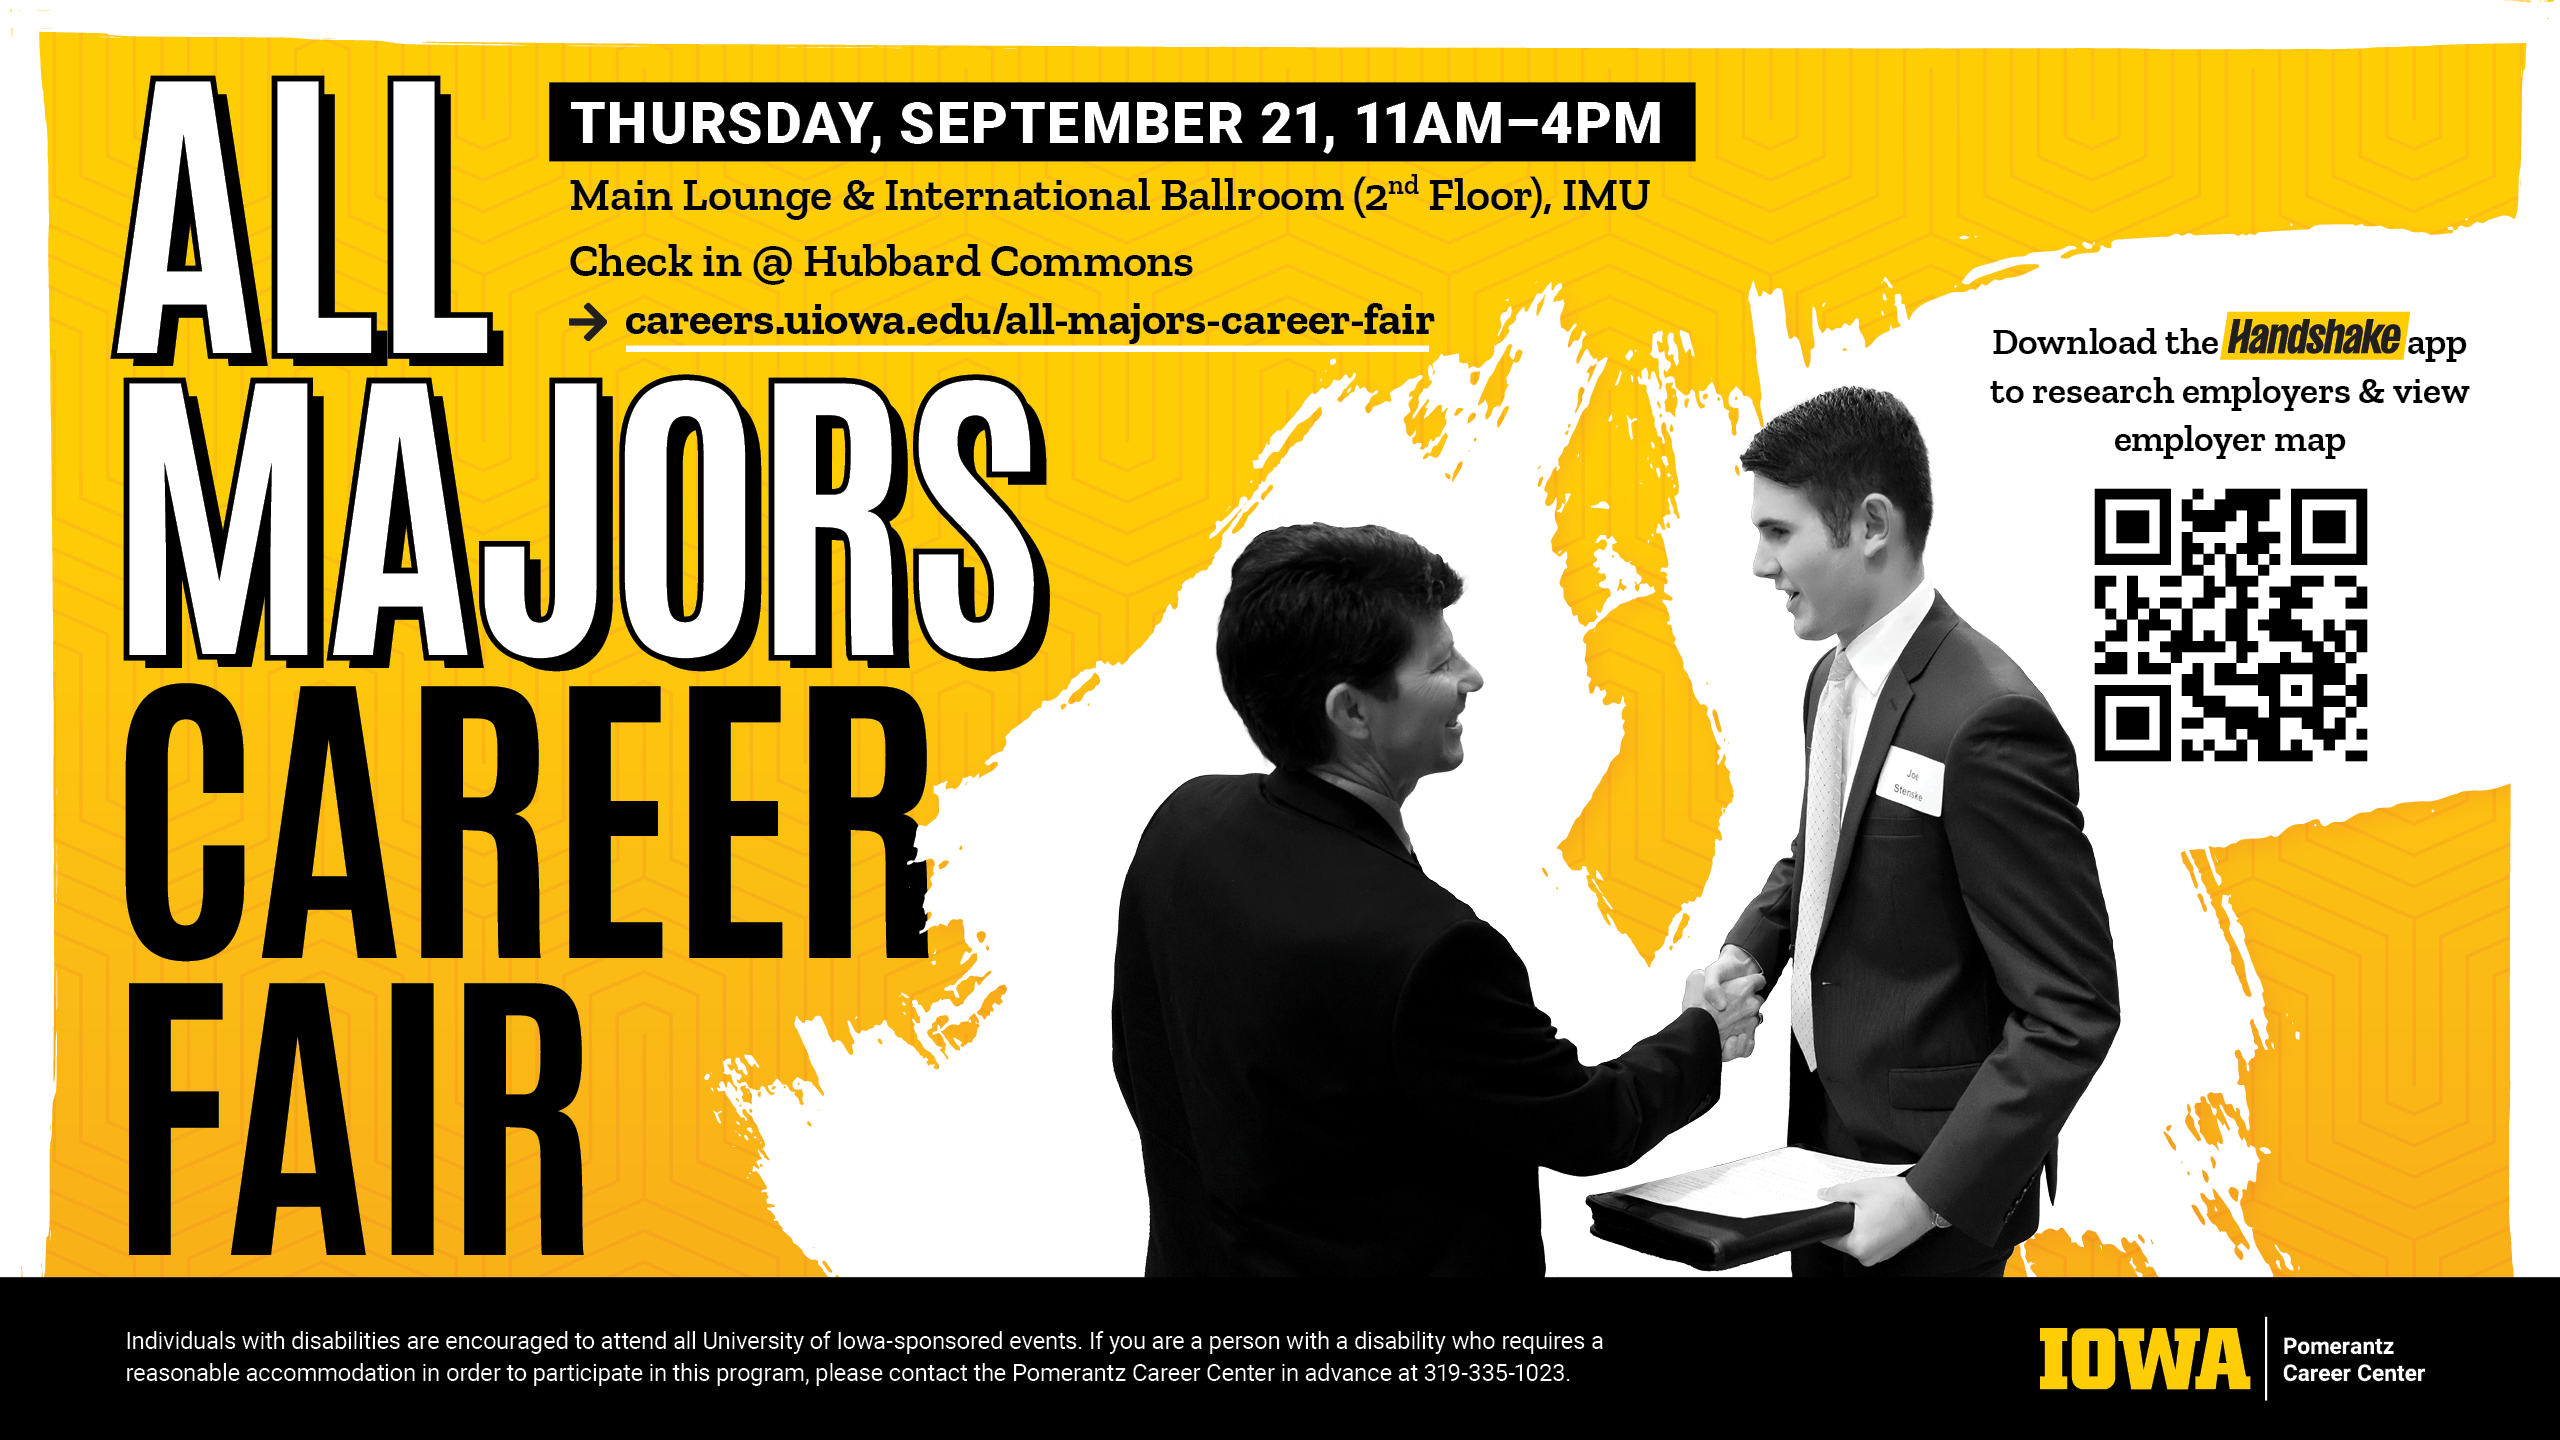 All majors career fair. Thursday, September 21 from 11am to 4pm in the Main Lounge and International Ballroom on the 2nd floor of the IMU. Check in at Hubbard Commons. Visit the career center website for more details.